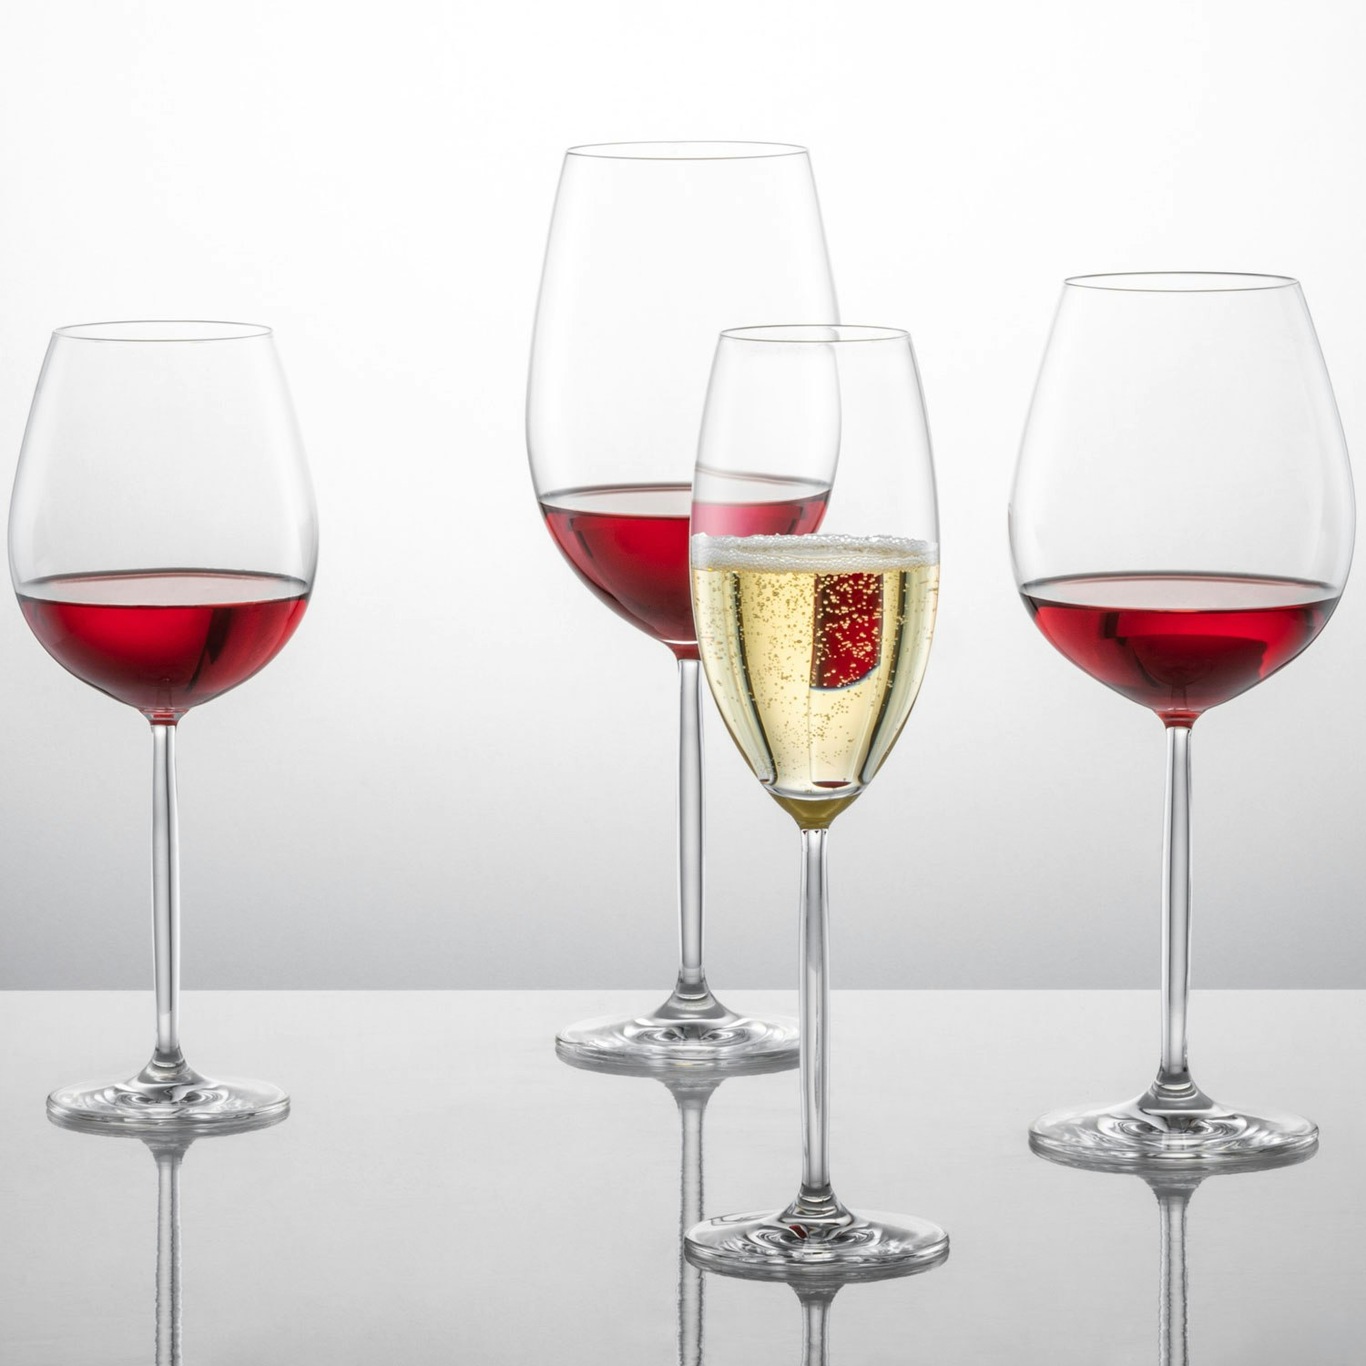 https://royaldesign.com/image/2/zwiesel-diva-burgundy-red-wine-glass-46-cl-2-pack-0?w=800&quality=80